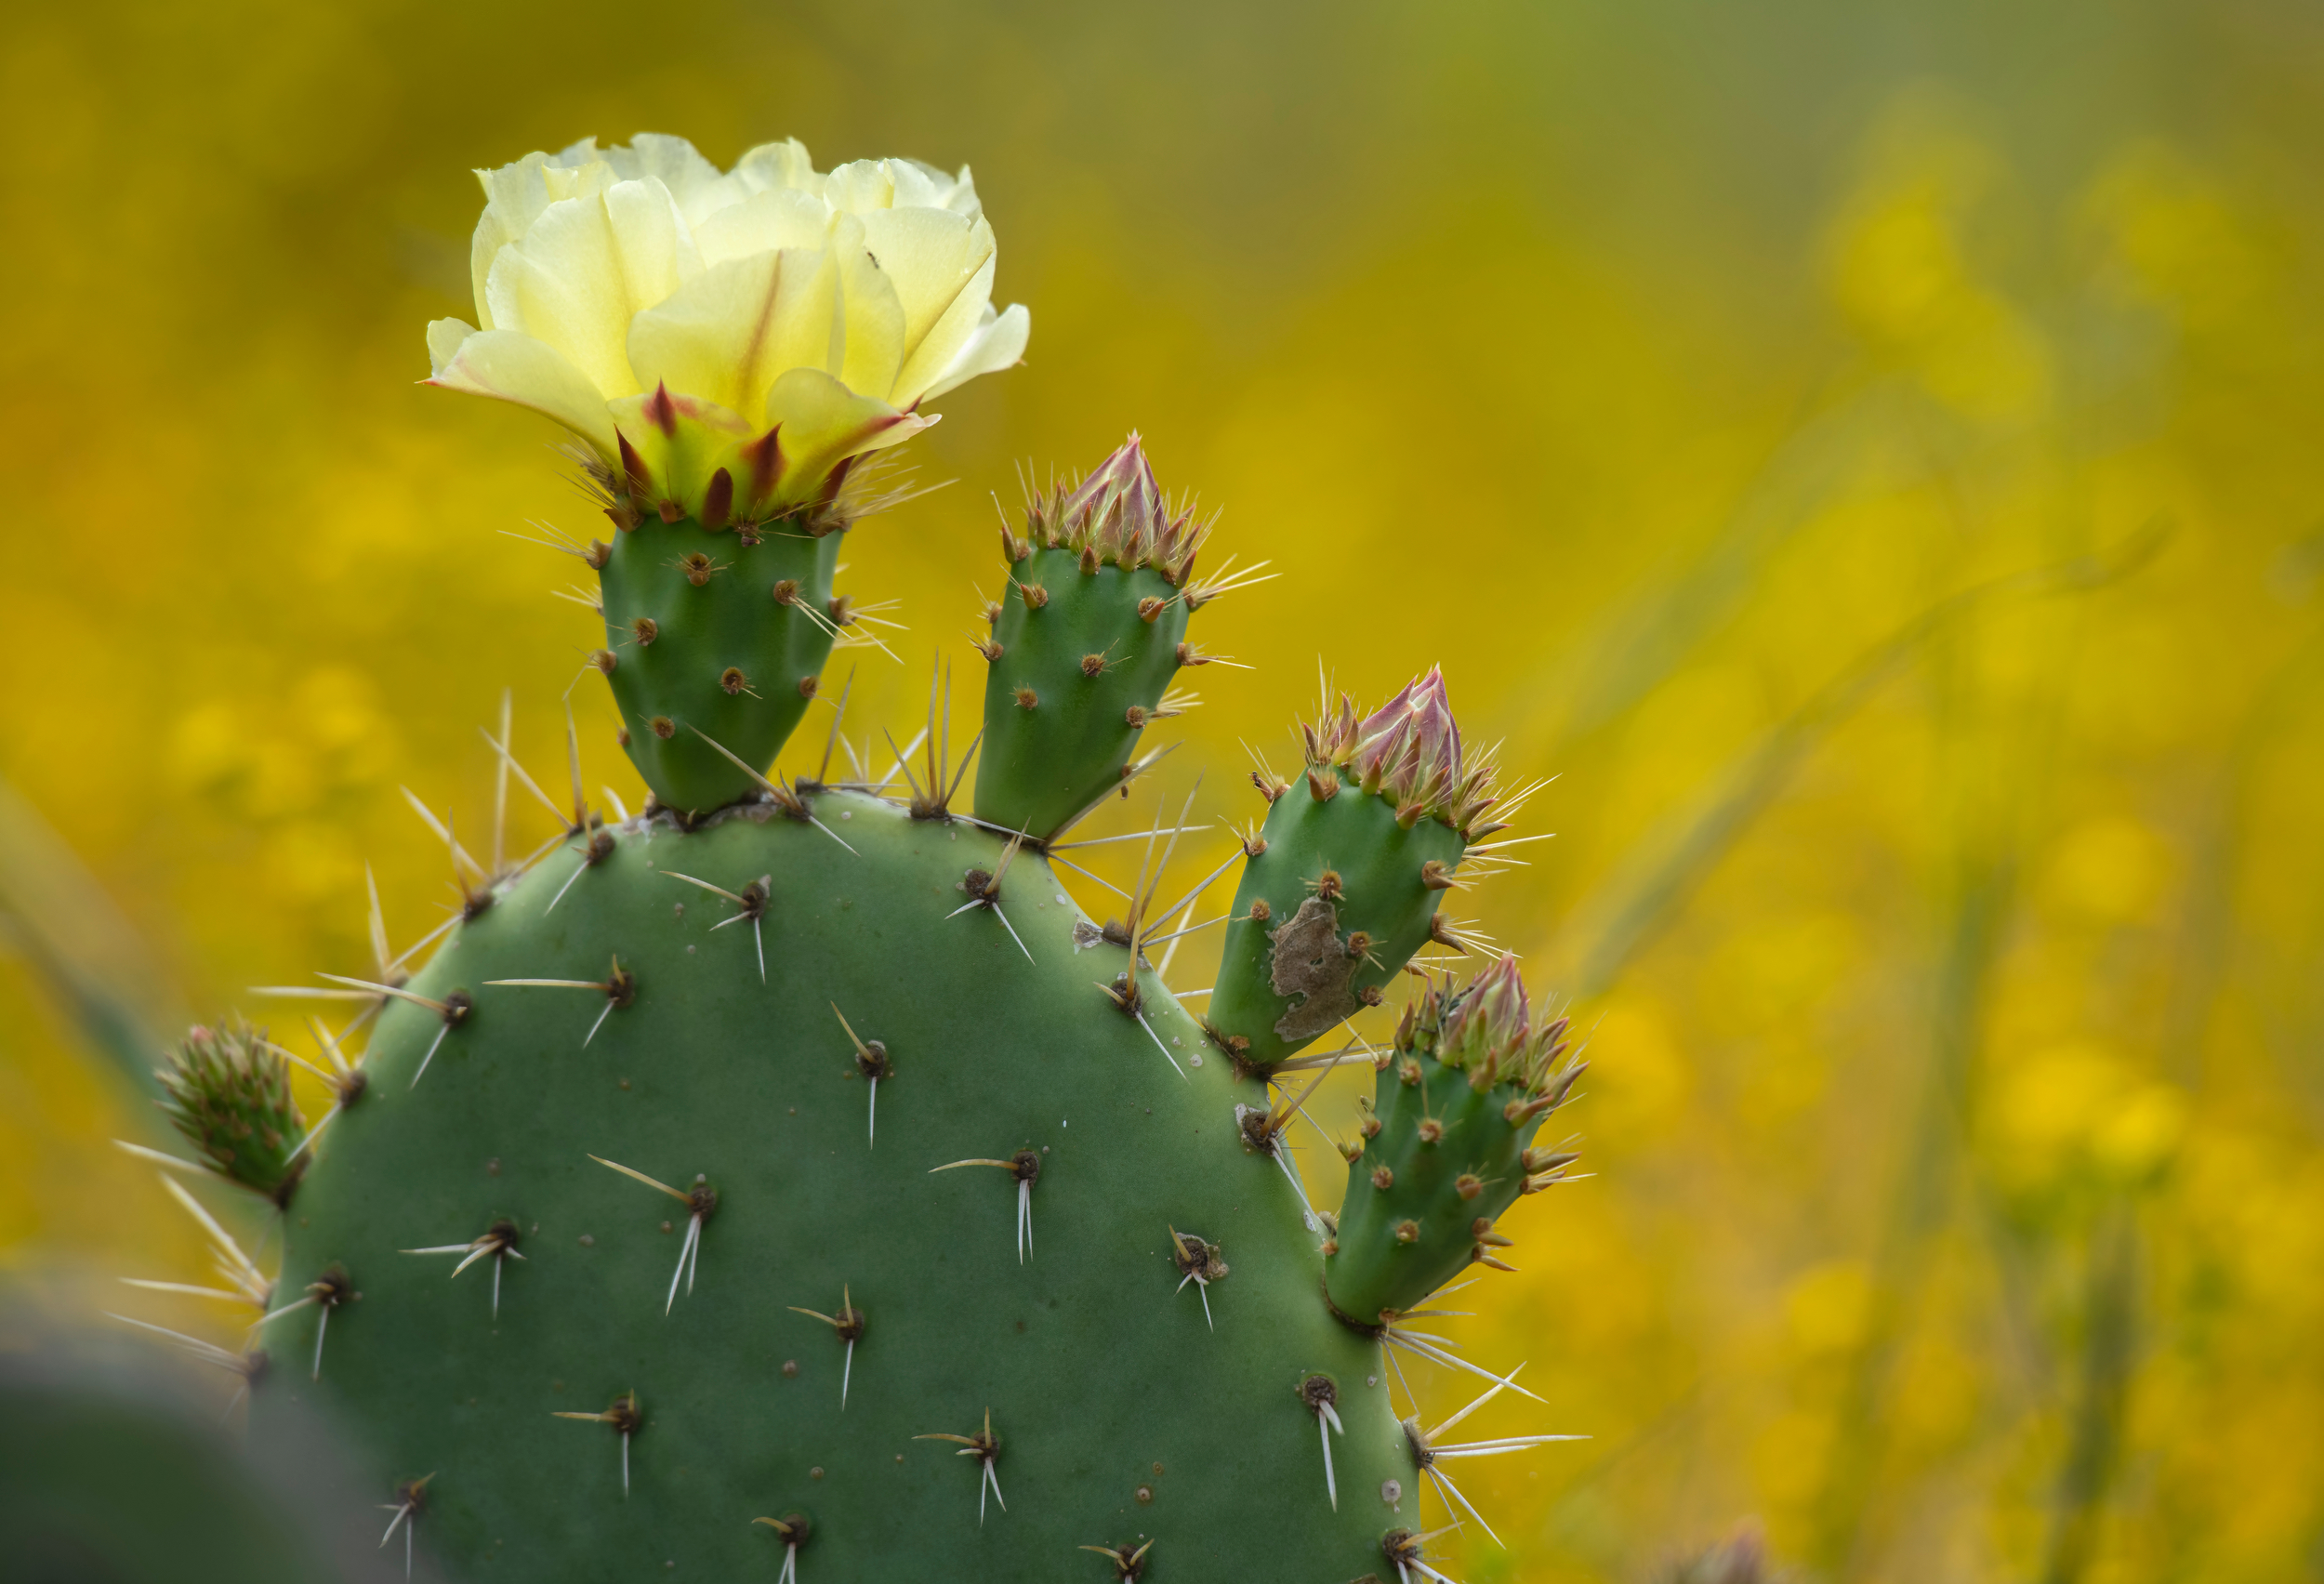 A prickly pear cactus blooms in the 60-acre Irvine preserve.